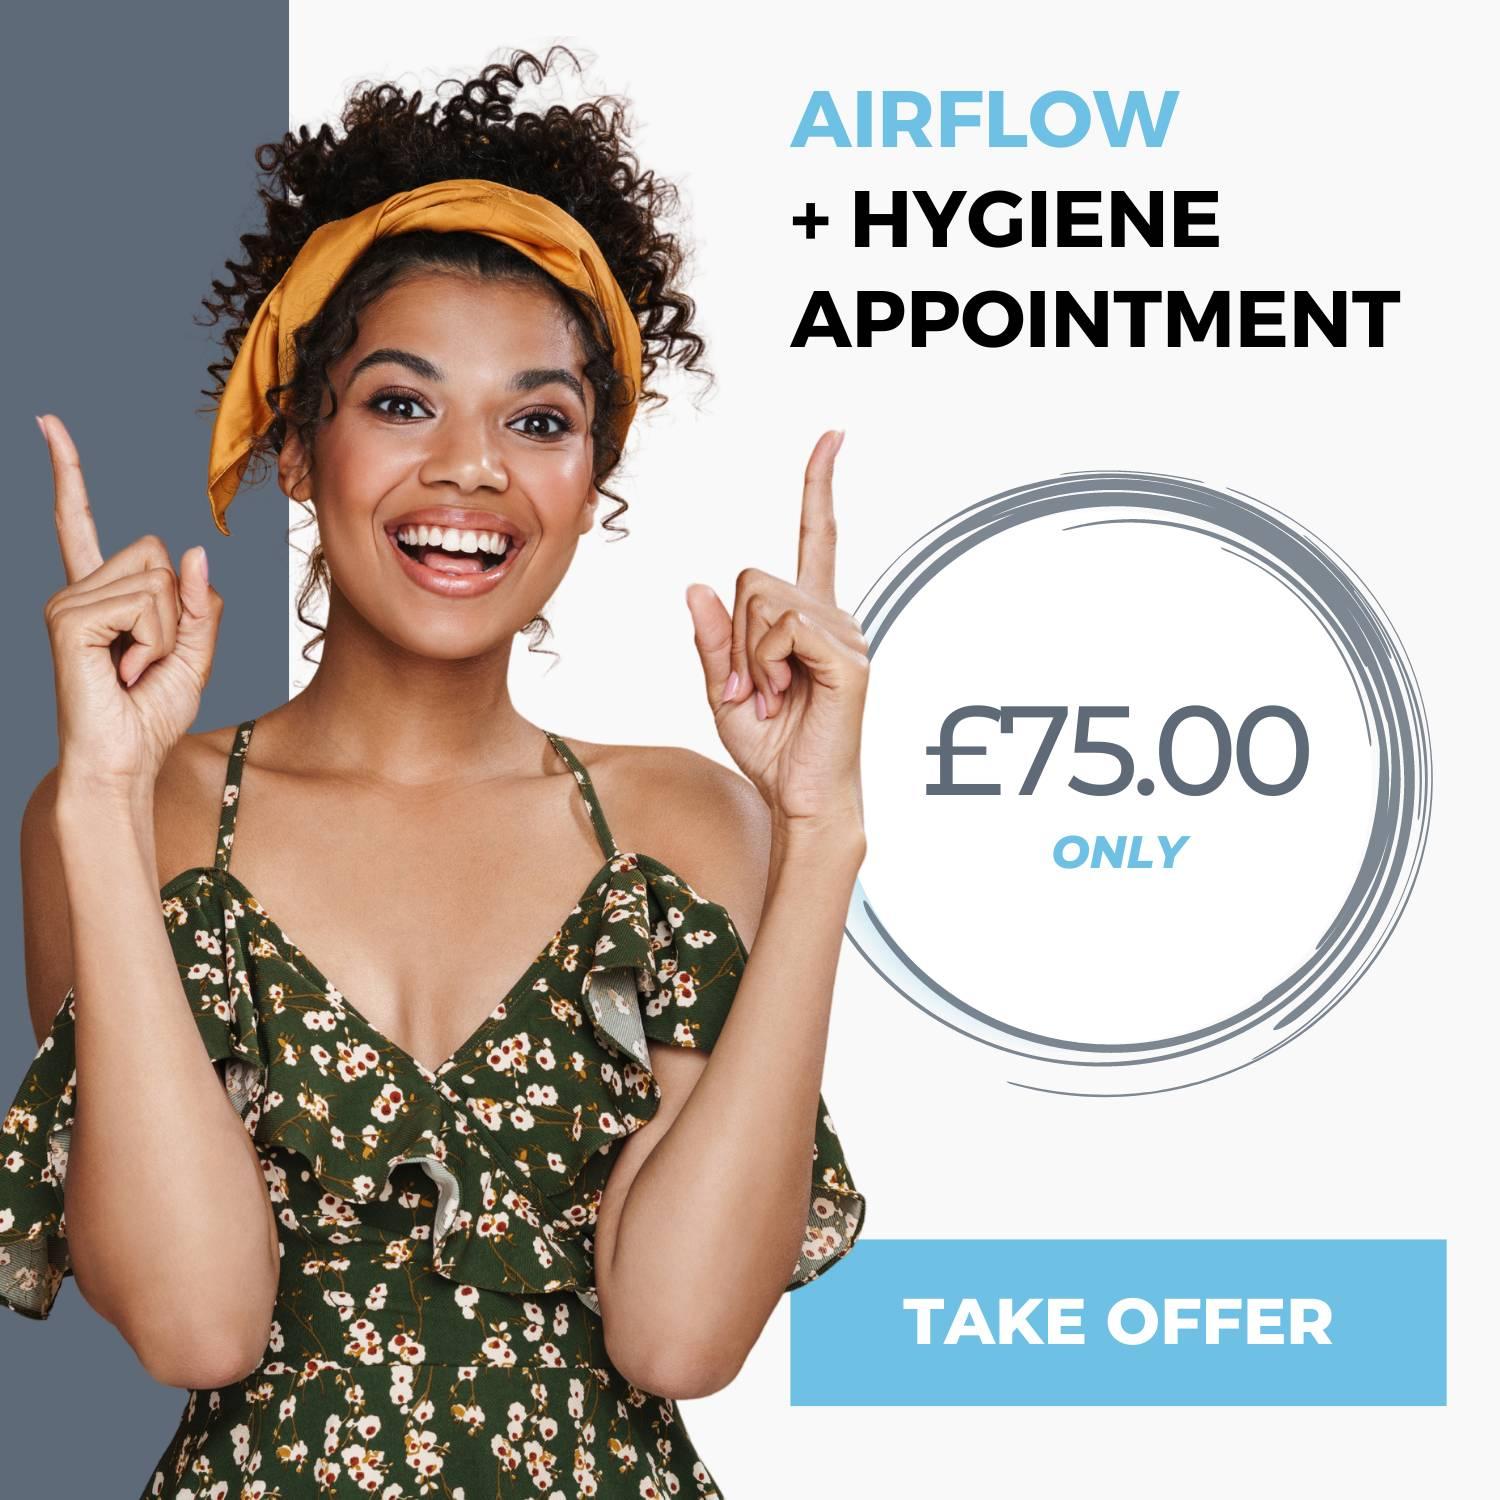 airflow tooth cleaning offer image